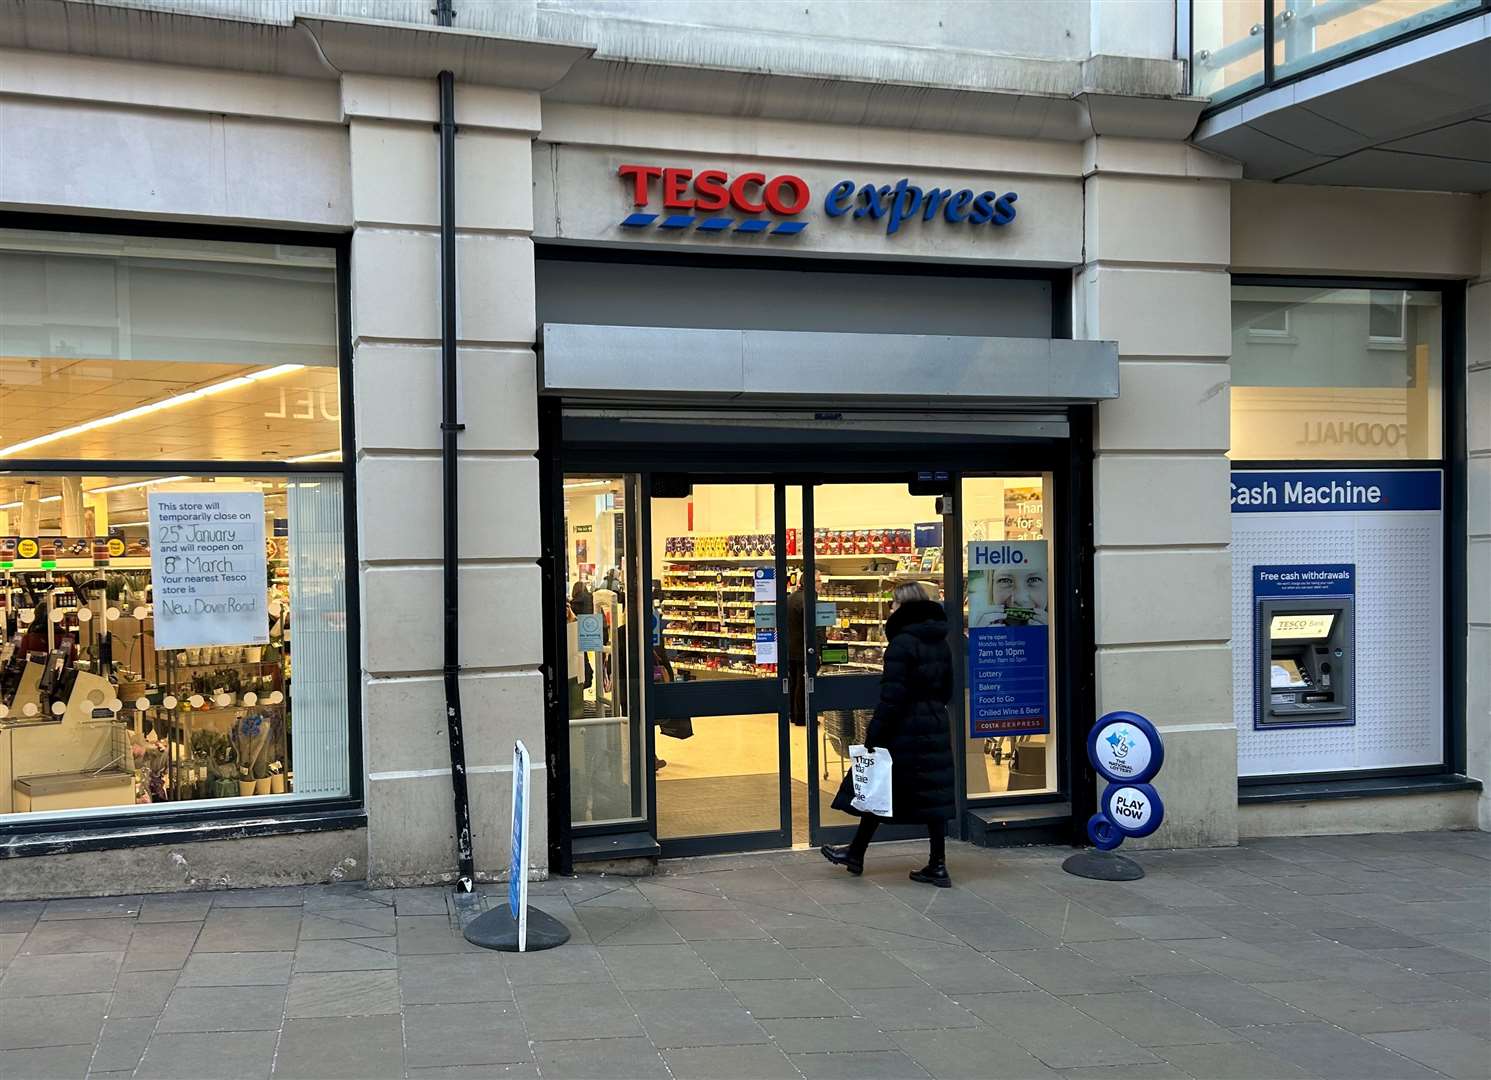 Police were called to an altercation at Tesco in Whitefriars, Canterbury